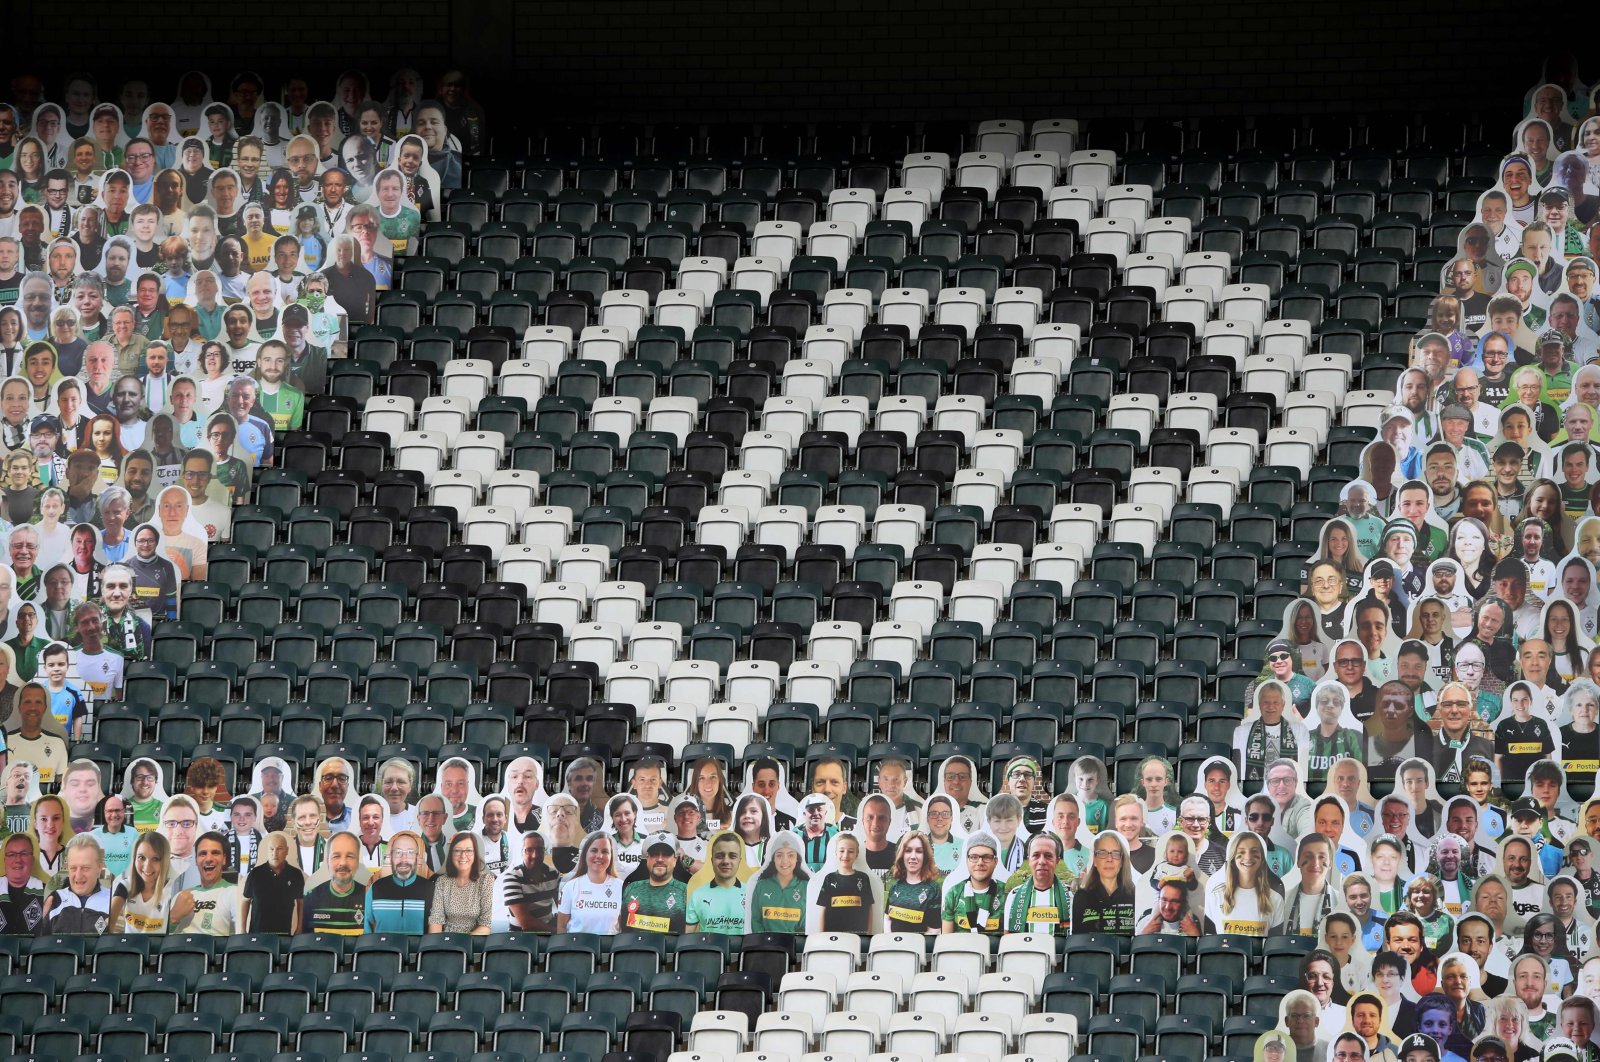 Cardboard cutouts fill the stands before a Bundesliga match in Moenchengladbach, Germany, June 27, 2020. (AFP Photo)